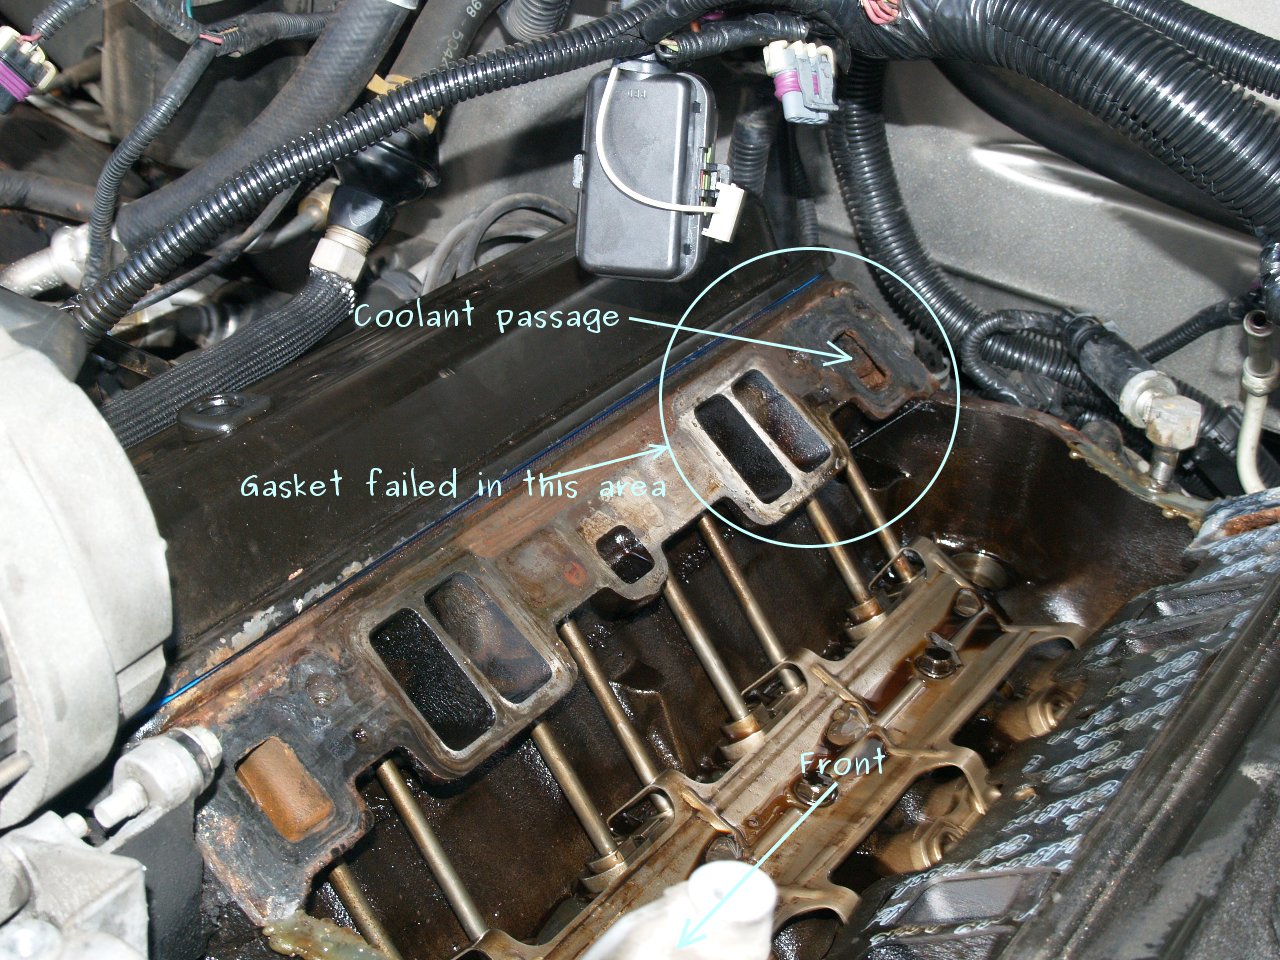 See P0162 in engine